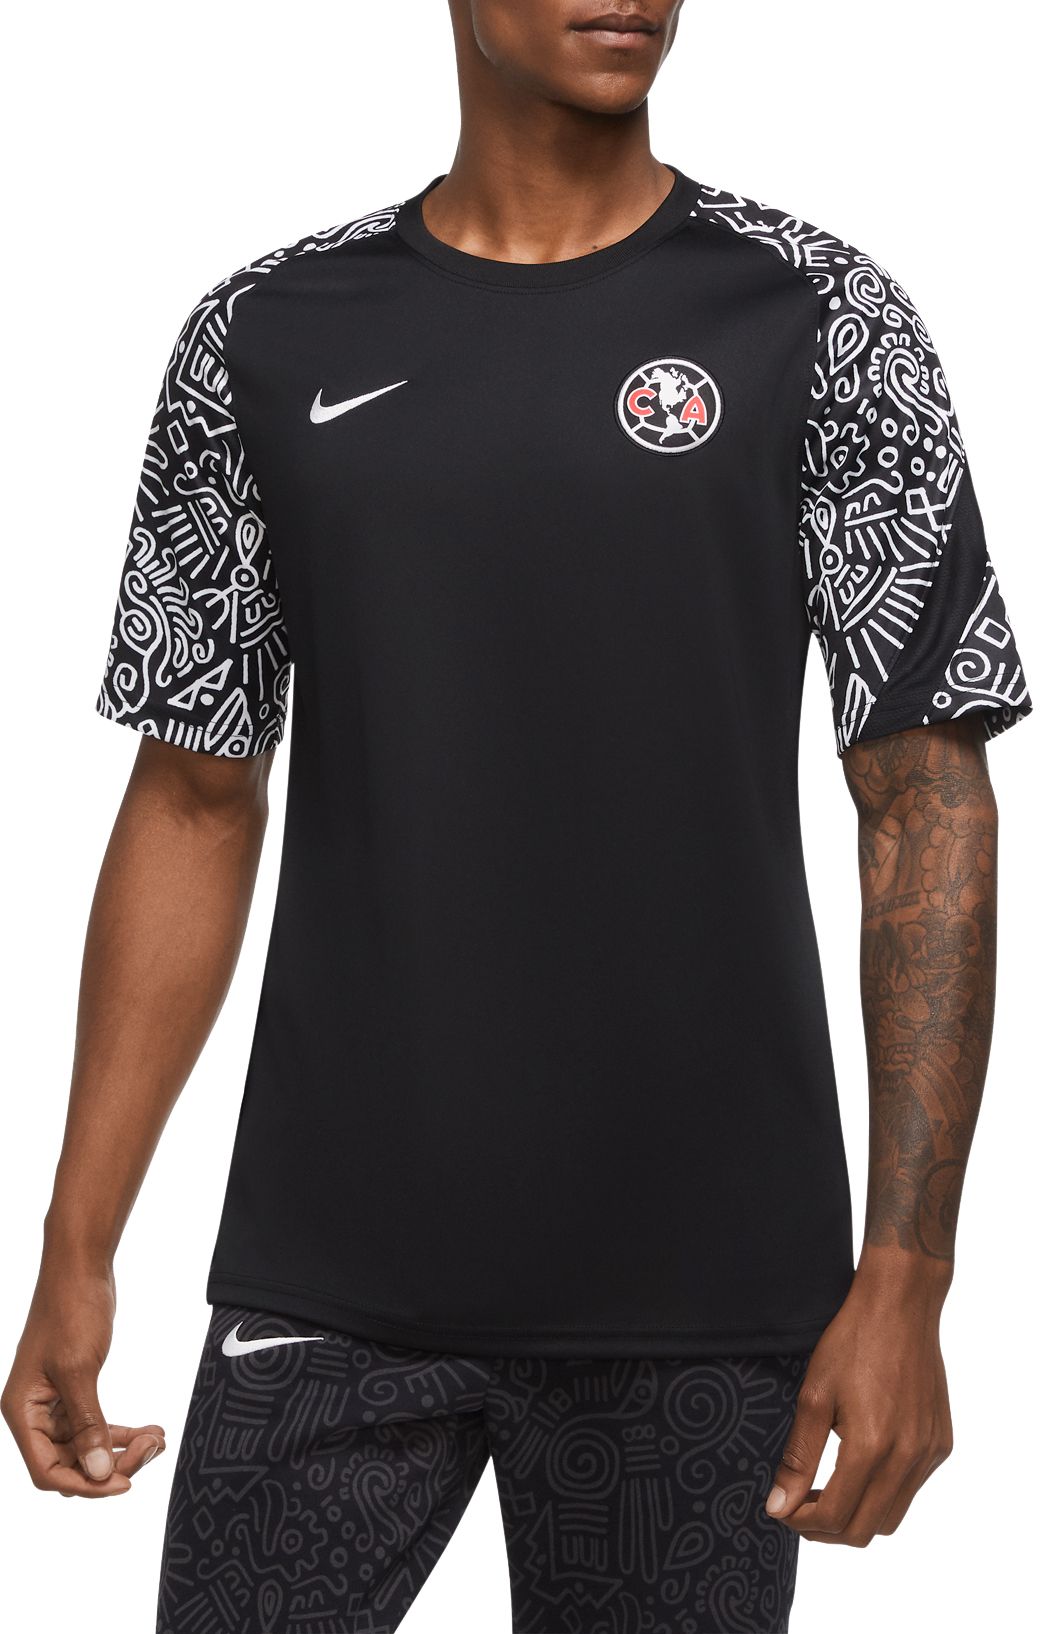 club america official jersey